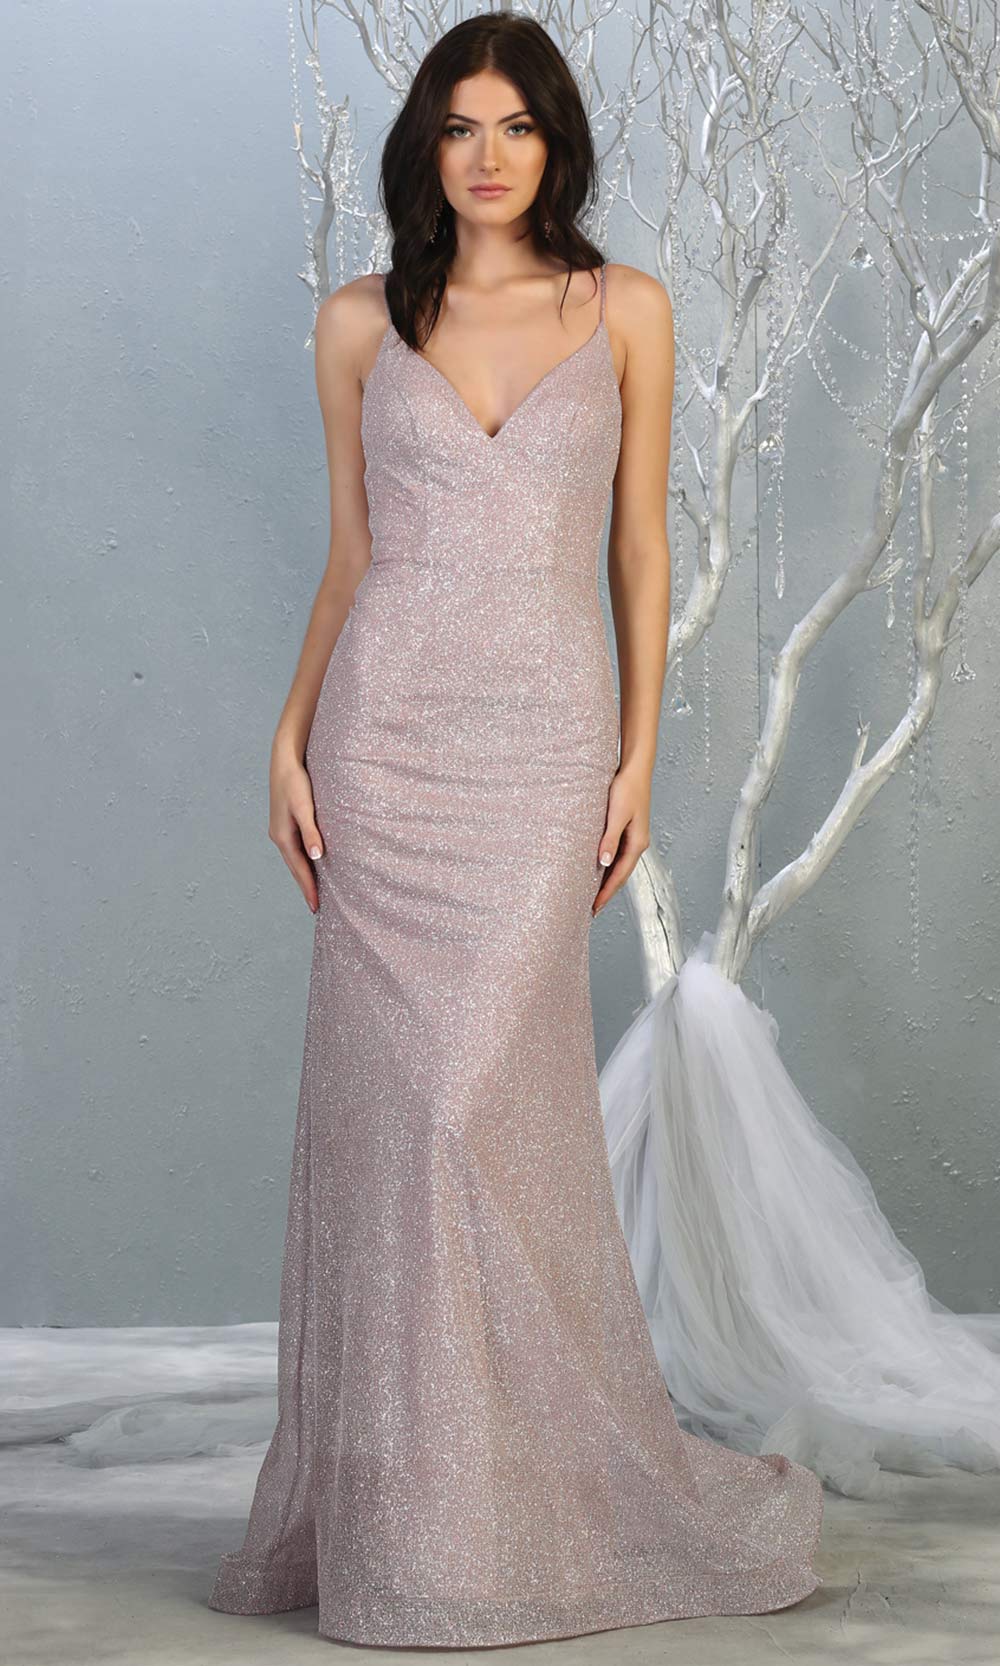 Mayqueen MQ1789 long mauve pink v neck evening fitted dress. Full length dusty rose glittery gown w/straps is perfect for  enagagement/e-shoot dress, formal wedding guest, indowestern gown, evening party dress, prom, bridesmaid. Plus sizes avail.jpg